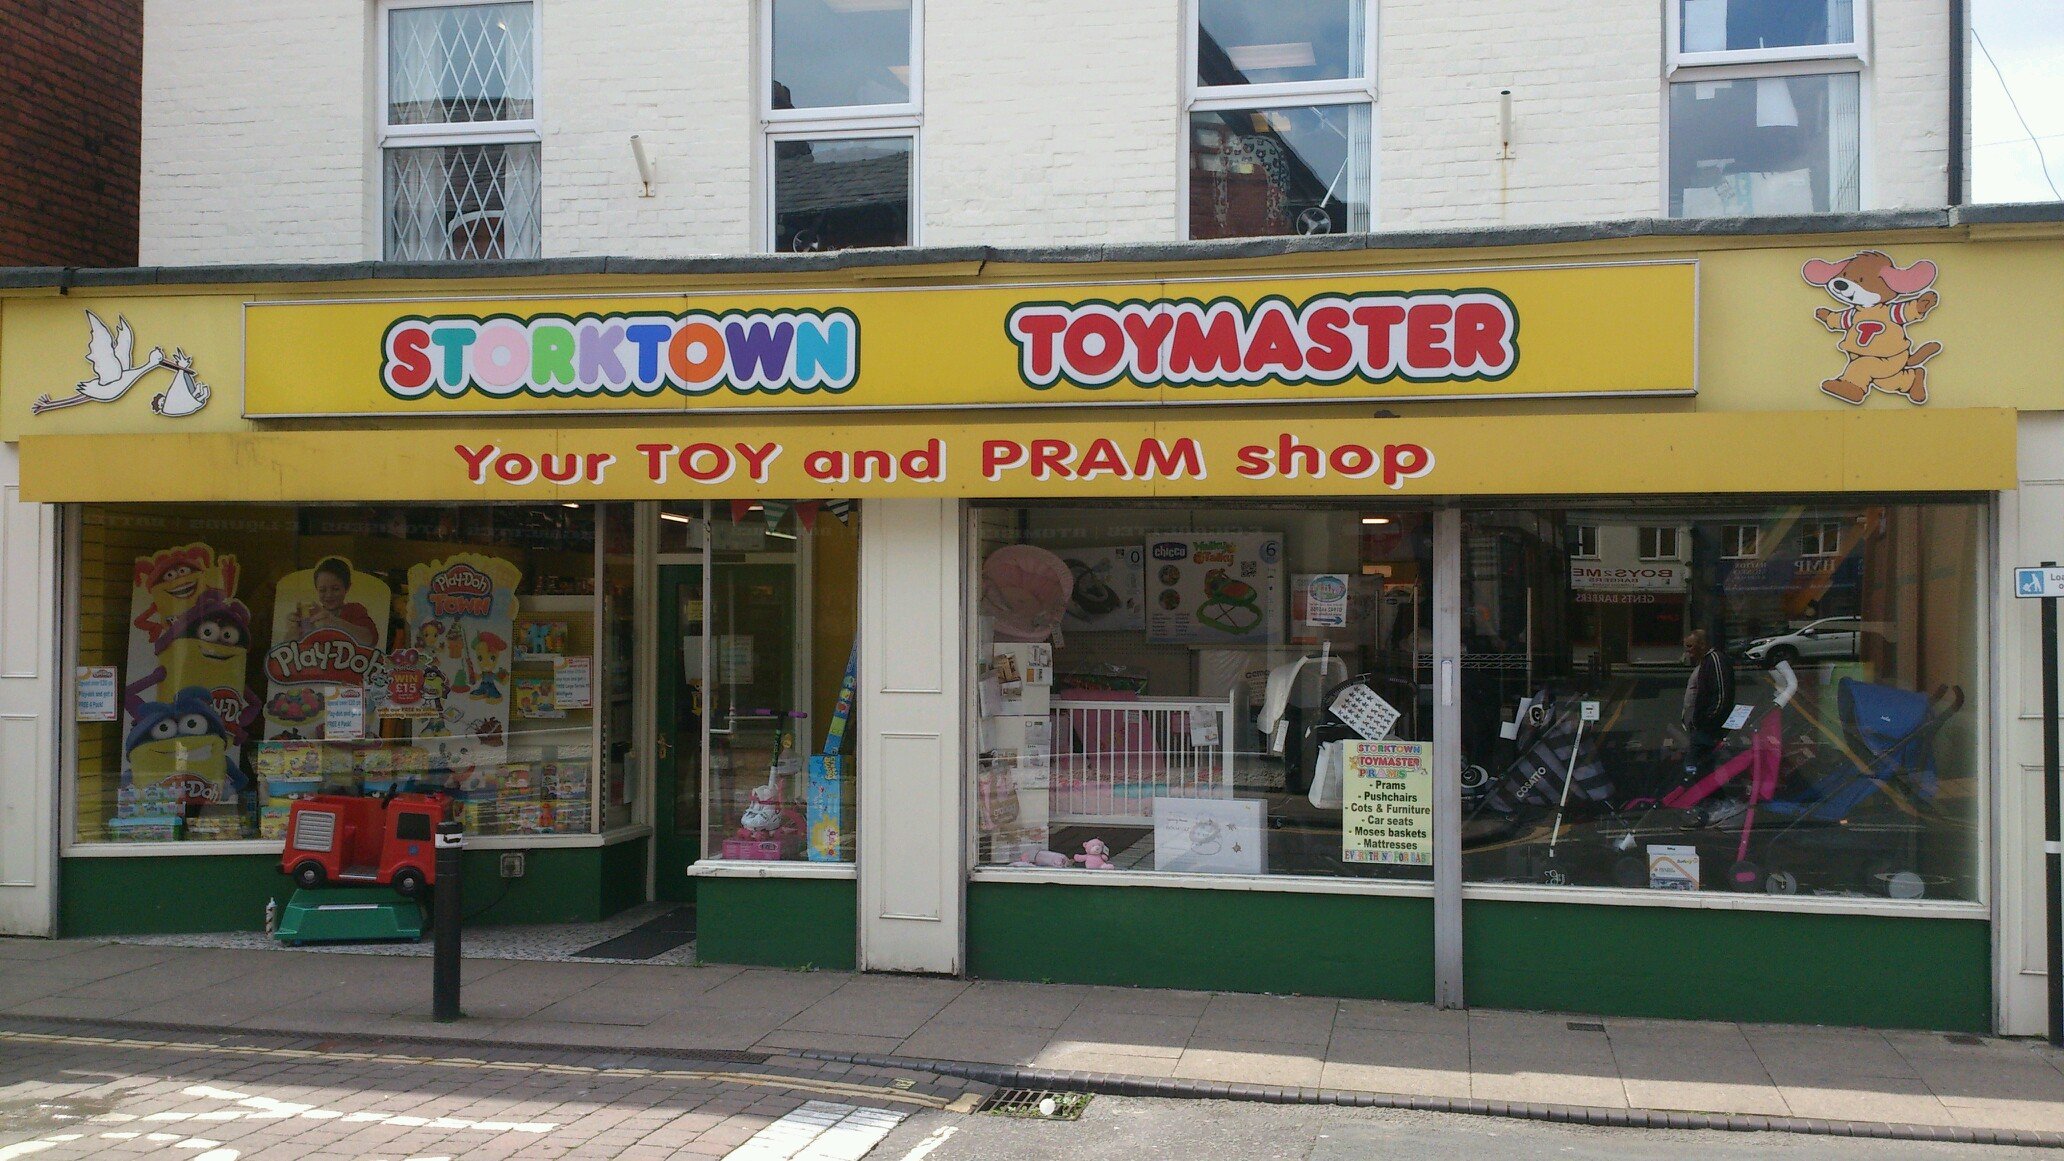 Storktown Toymaster a family firm providing toys&prams for over 65 years.Stocking all the major brands and new products.